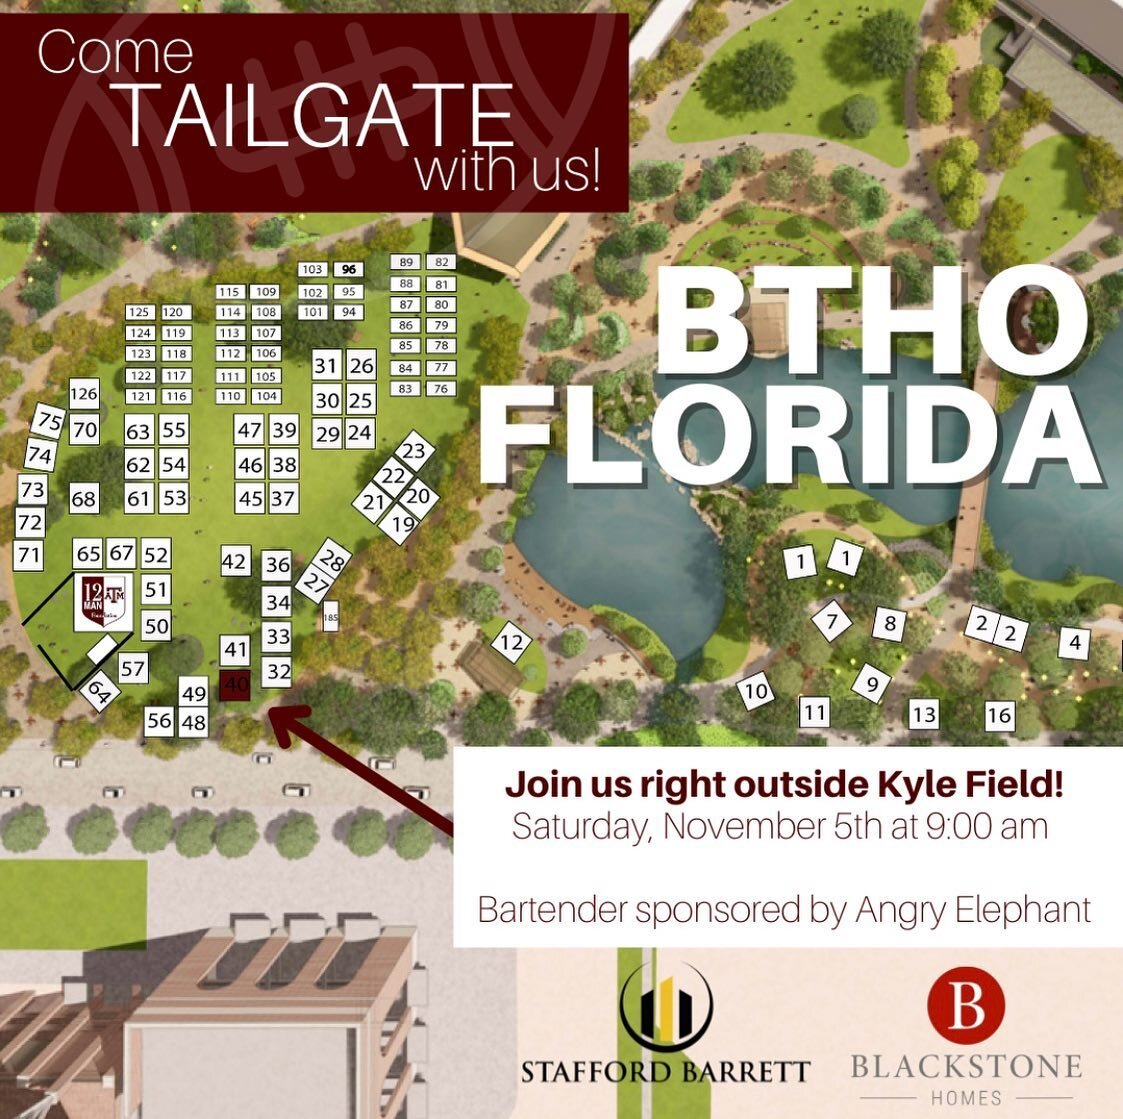 Come Tailgate with us this Saturday!